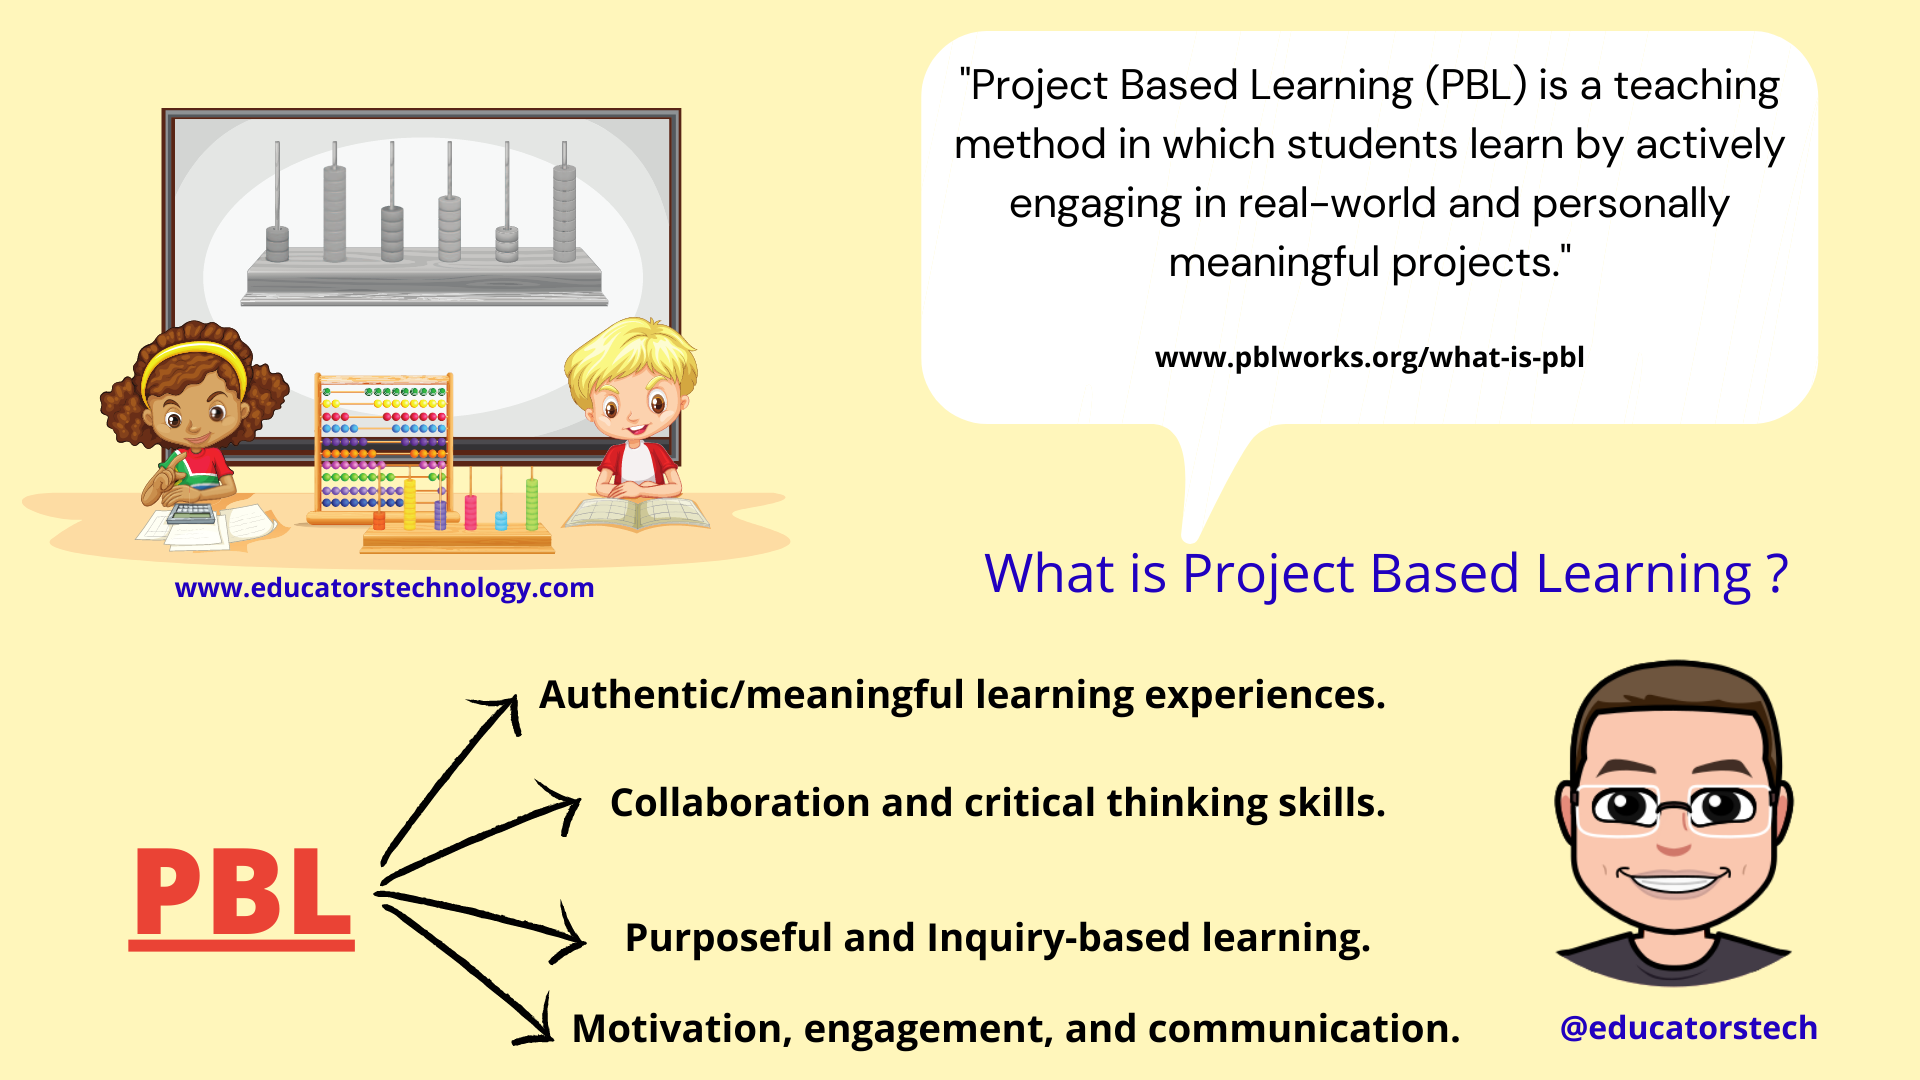 3 Important Resources to Help You Integrate Project Based Learning in Your Classroom